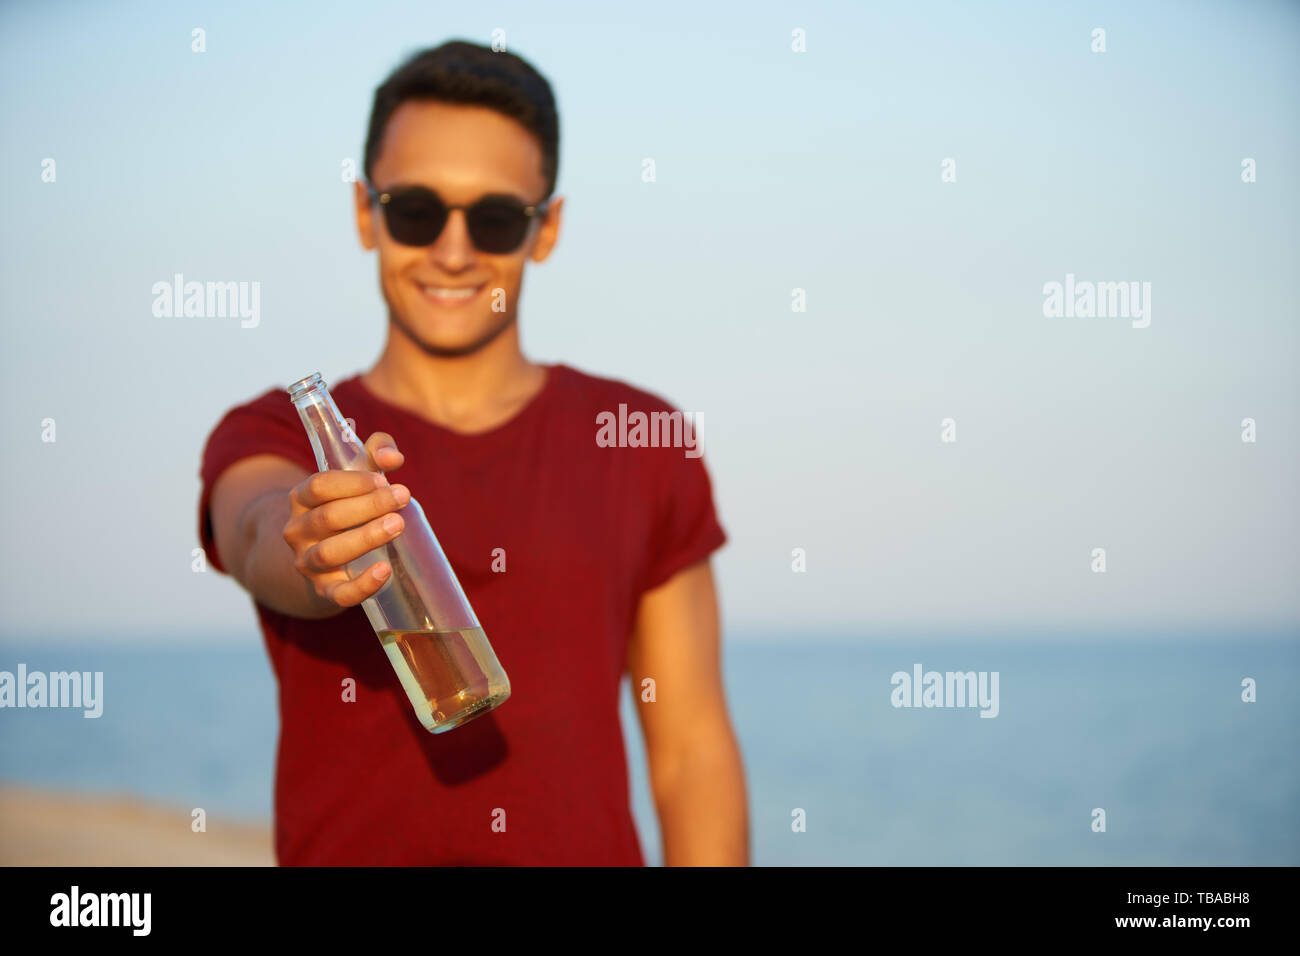 Young handsome man drinking beer on the beach during sunset. Male quenches thirst with lemonade beverage at sandy sea shore. Guy proposes or offers Stock Photo